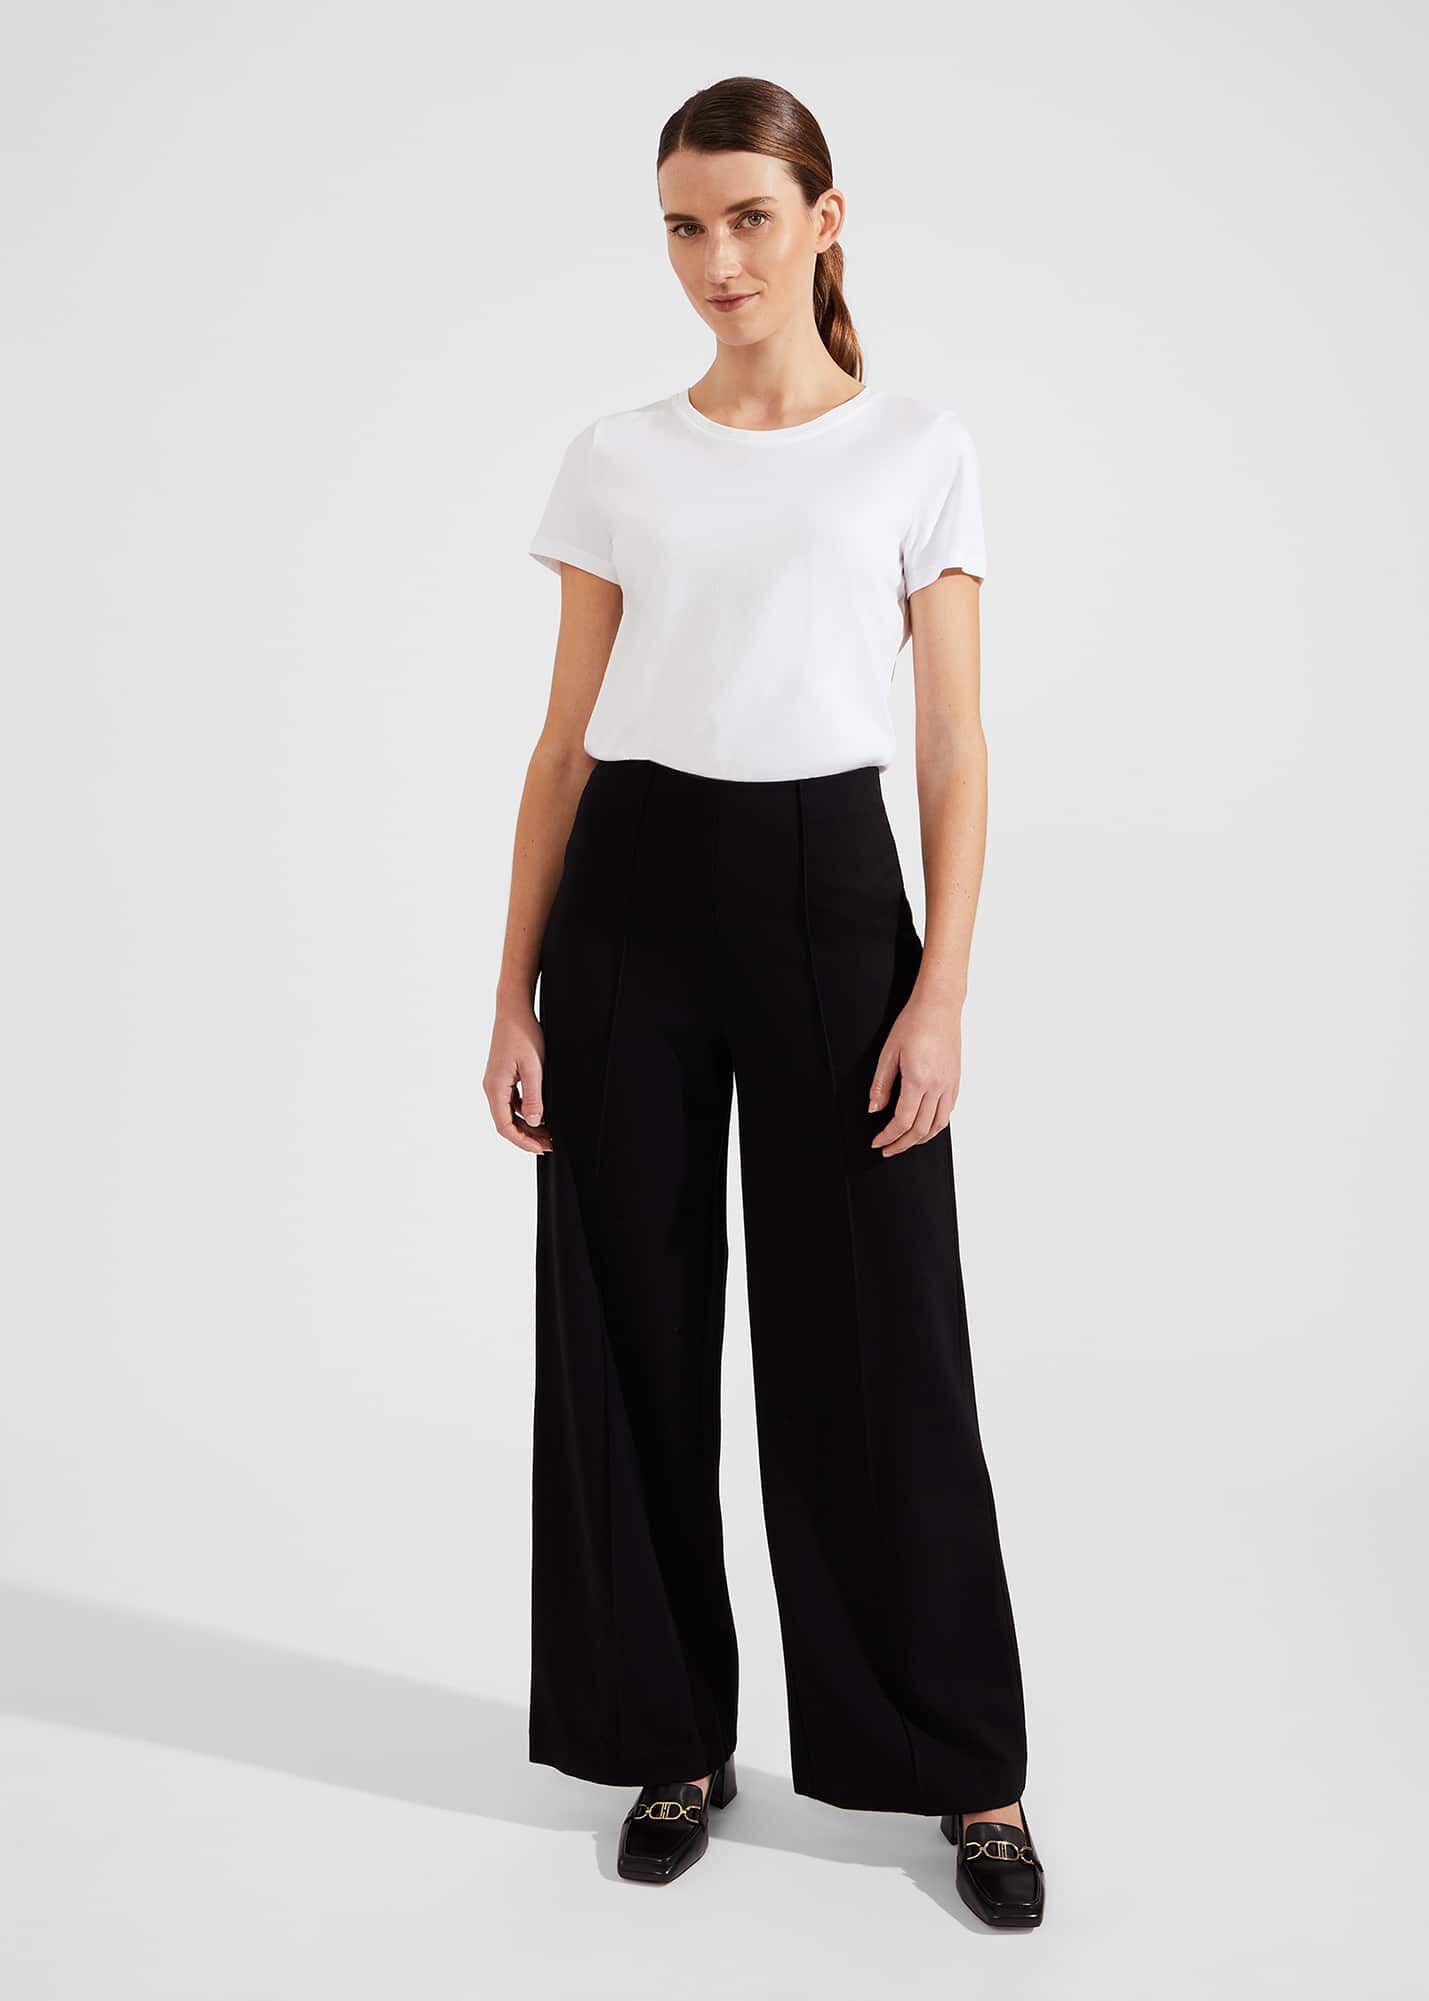 Forever New Petite Elizabeth Belted Tapered Pant In Black | MYER